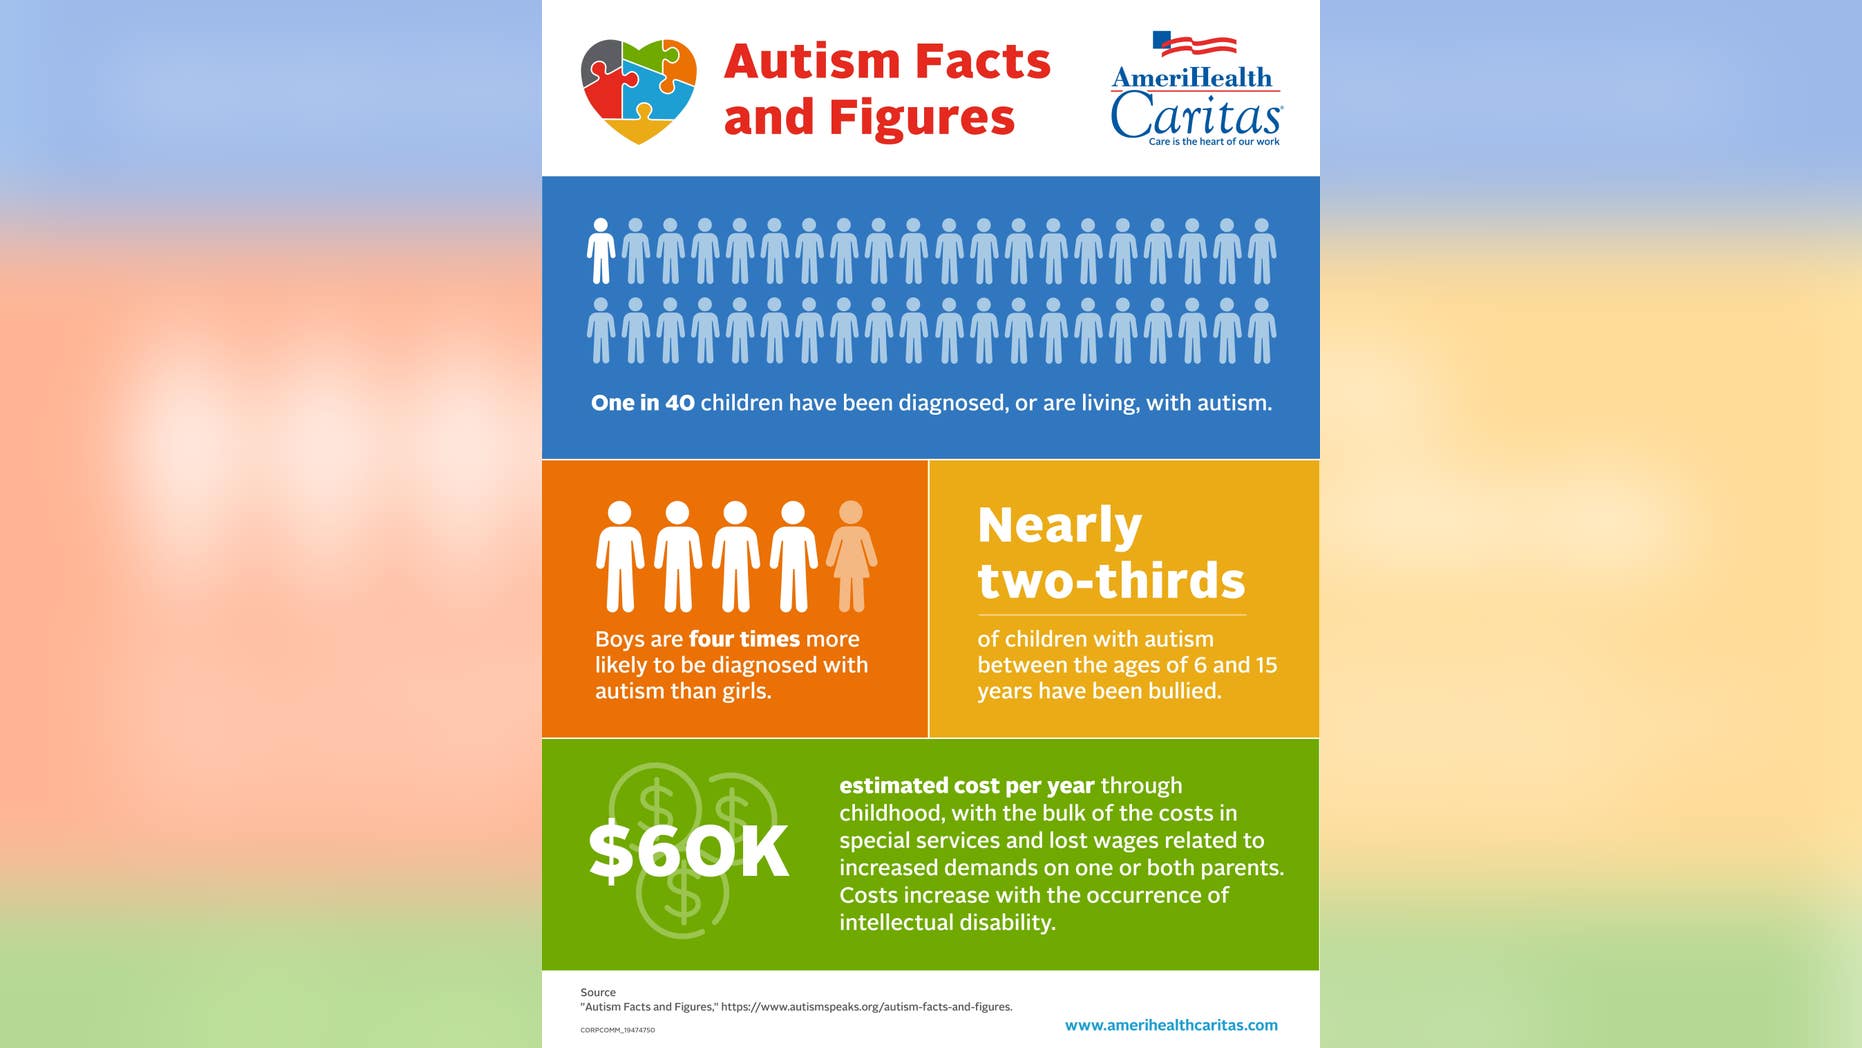 A recent study released by the CDC found that New Jersey had the highest percentage of autism cases.